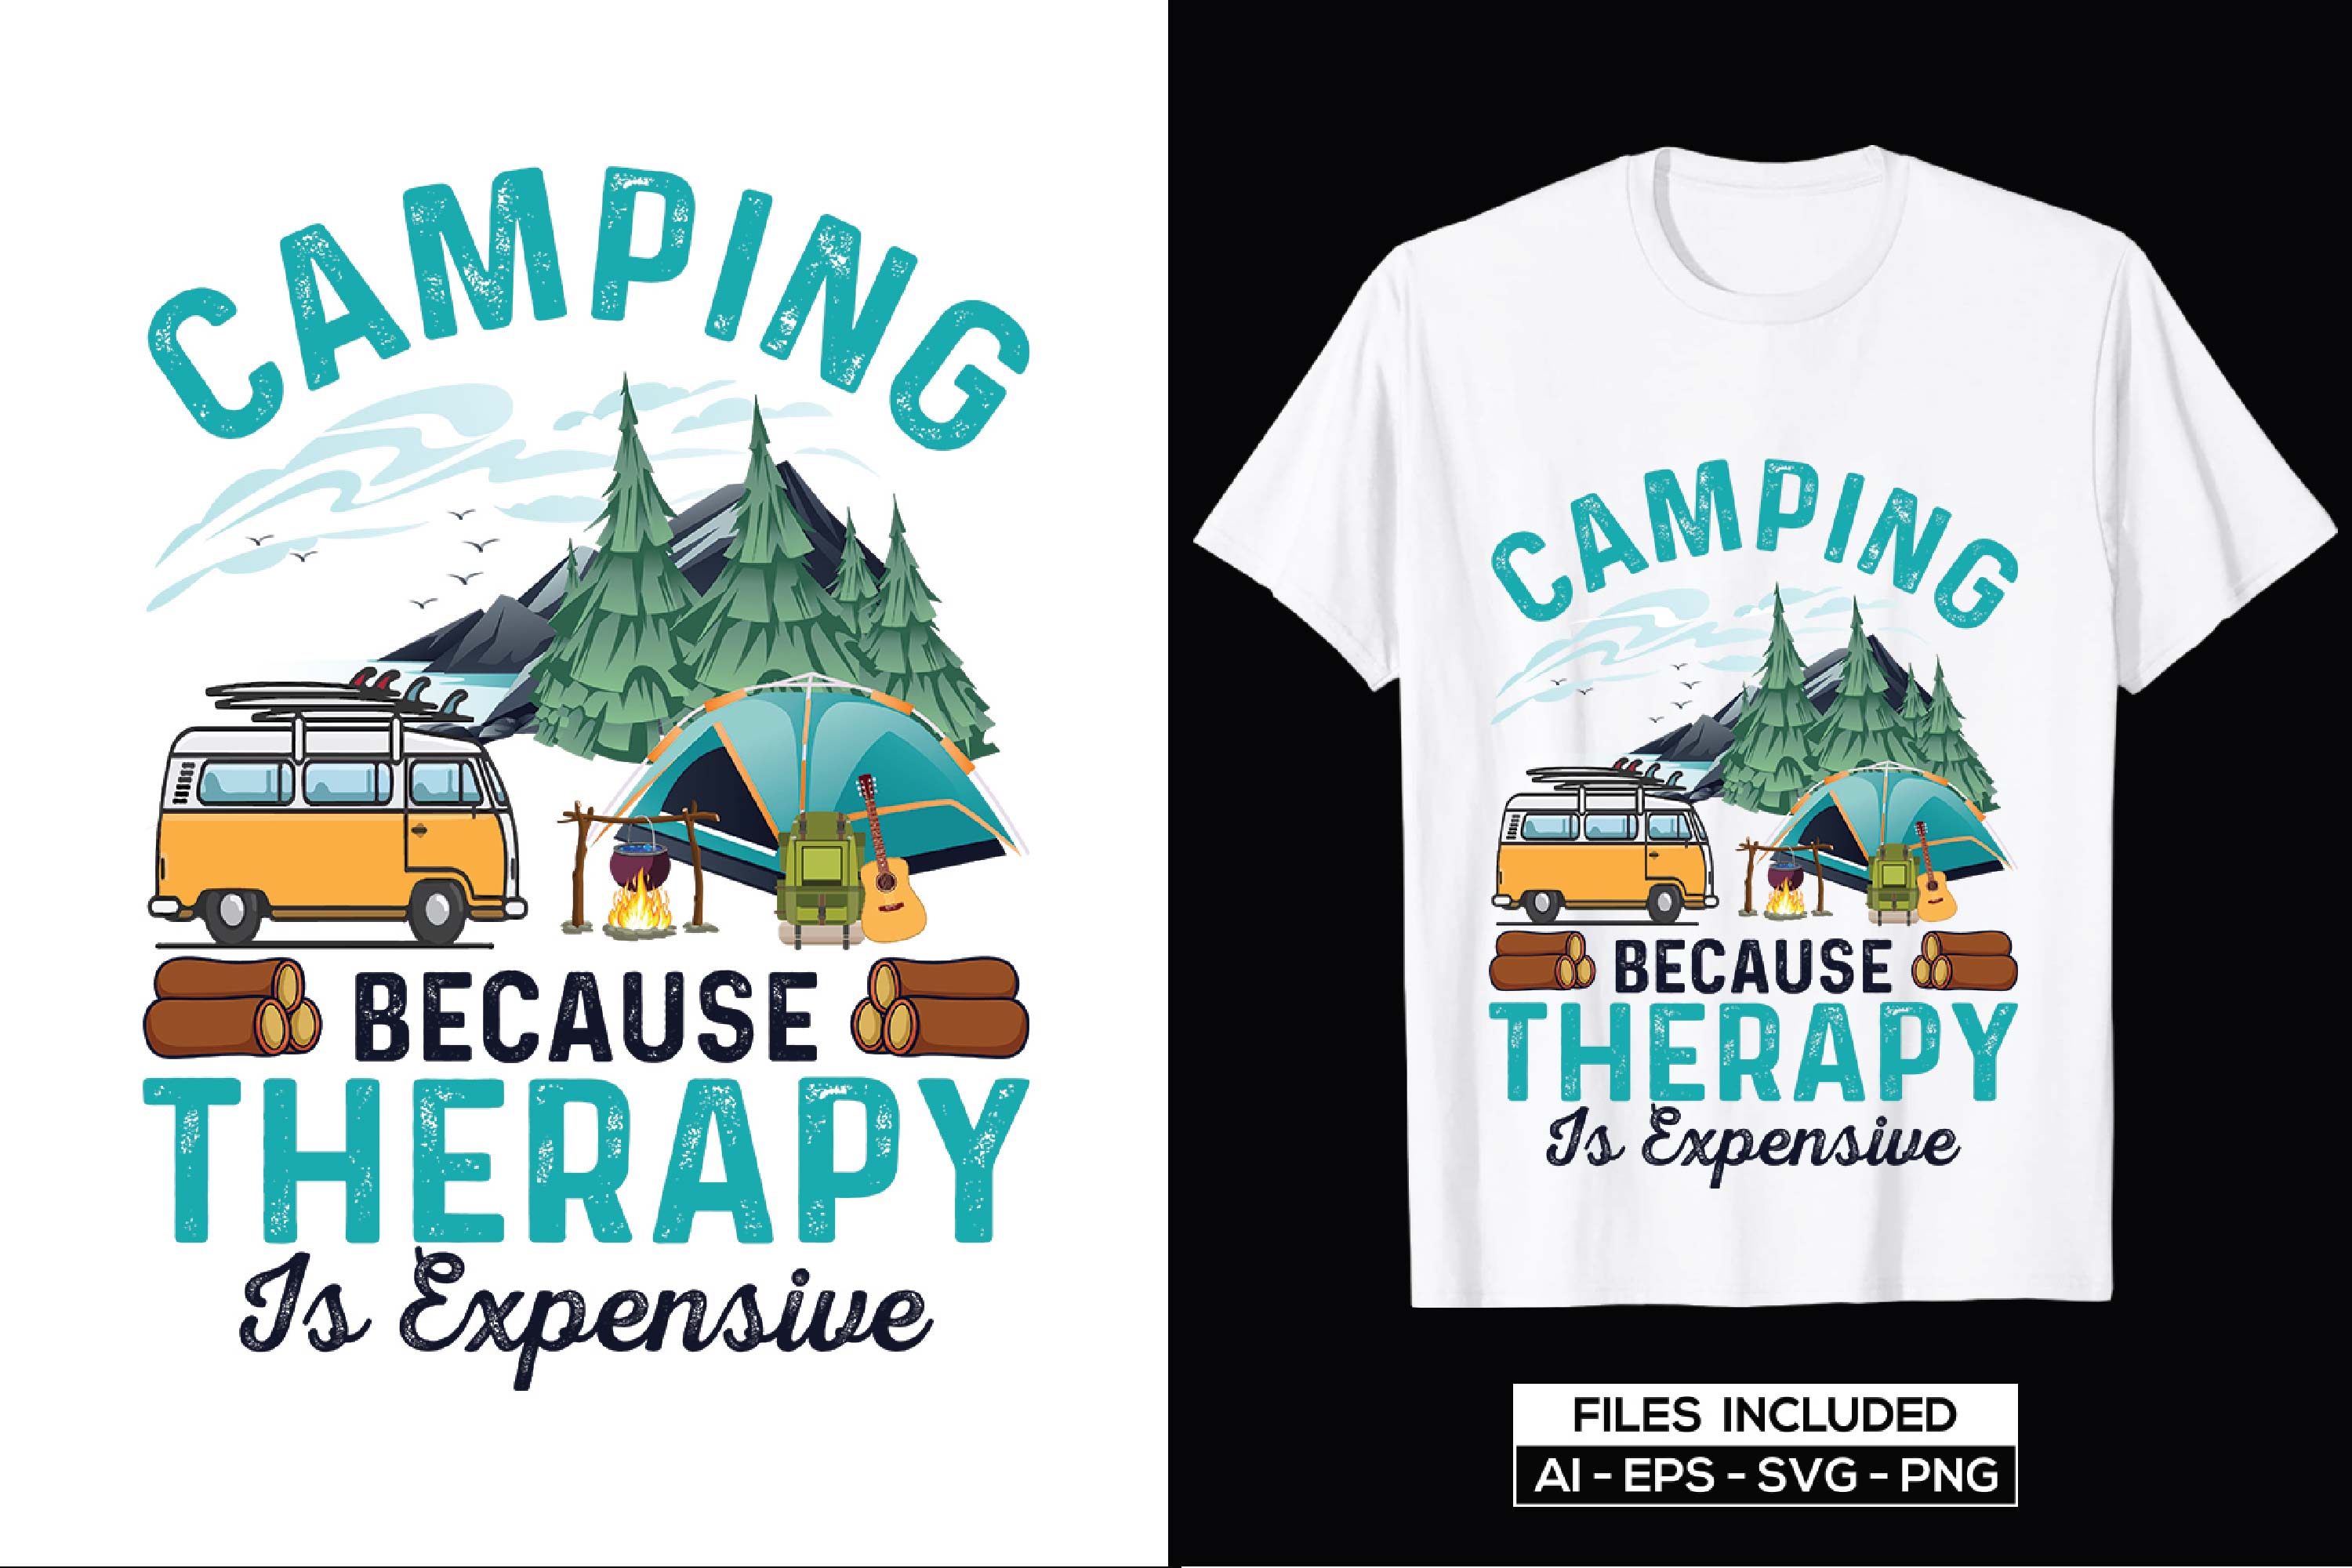 Image of a white t-shirt with an elegant print on the theme of camping and a colorful landscape.